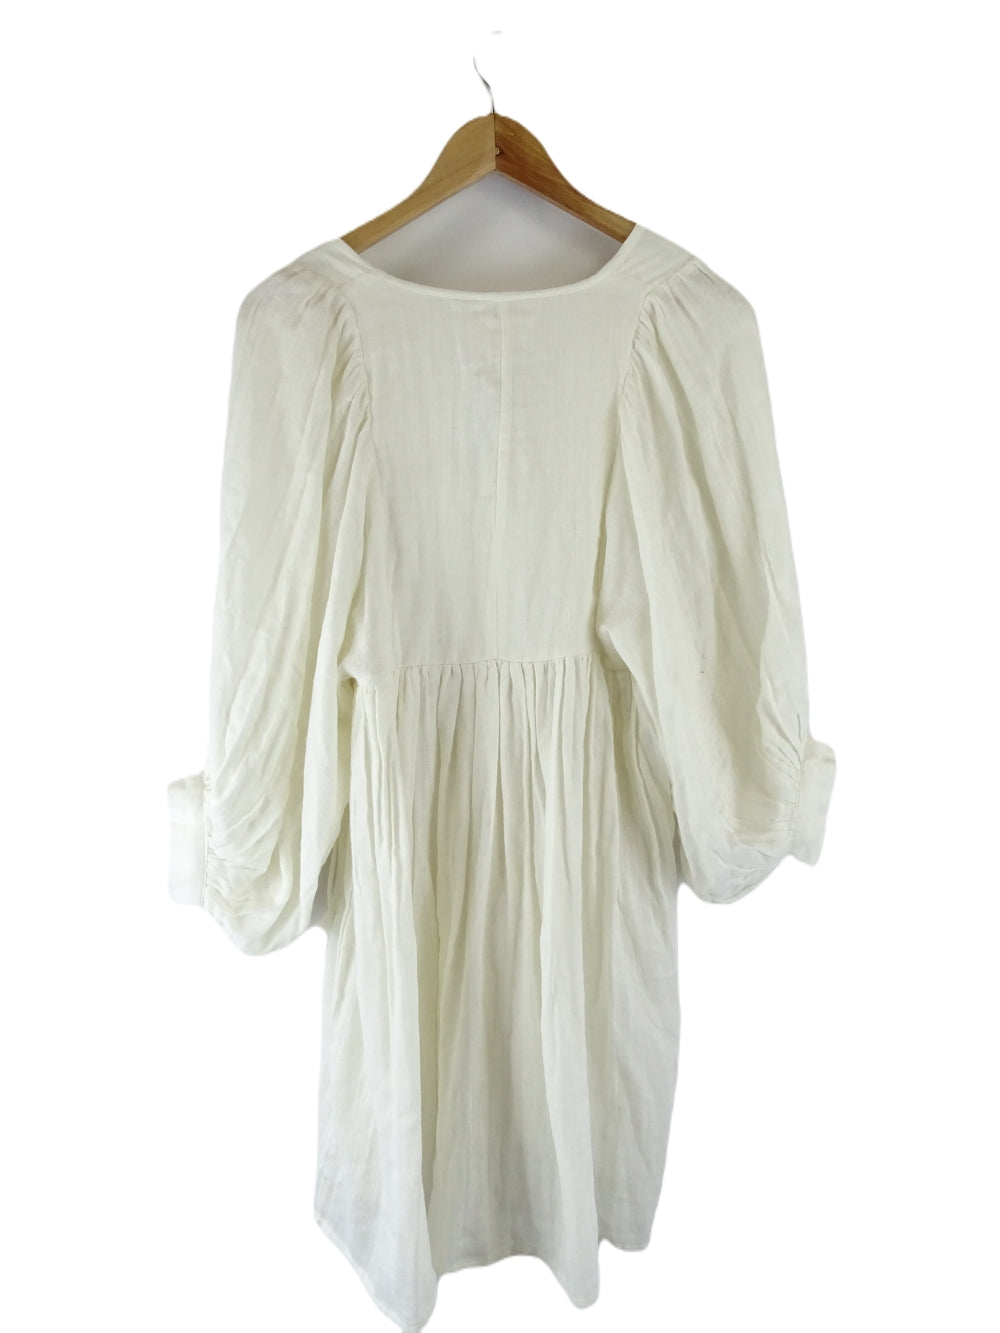 Daughters of India White Dress XS